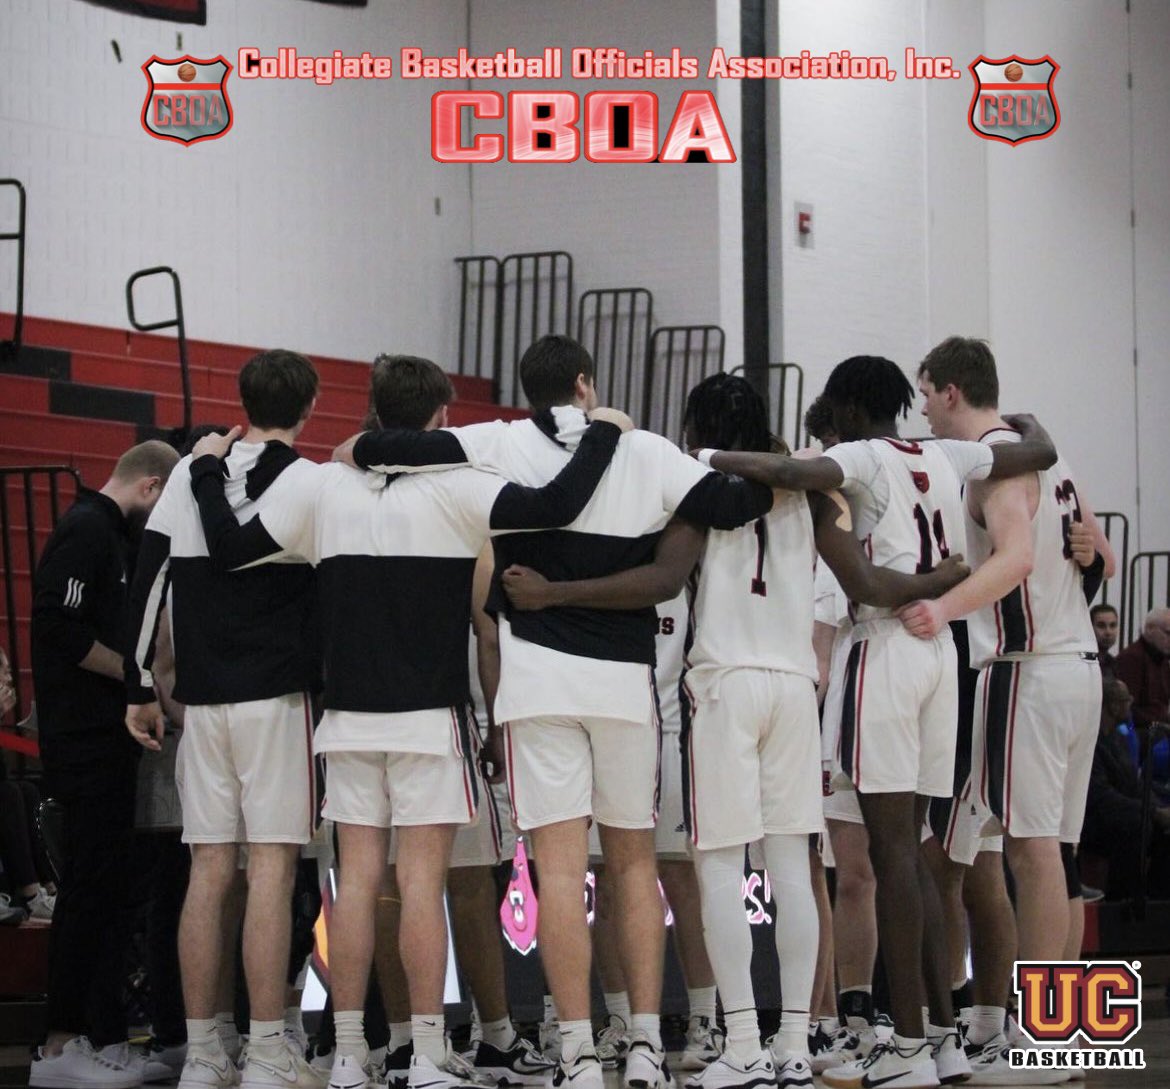 Excited to announce that our program recently received the Schoenfeld Sportsmanship Award from the College Basketball Officials Association for the 8th time in program history!

This is the highest honor that the CBOA annually bestows on any collegiate institution.

#upthebears